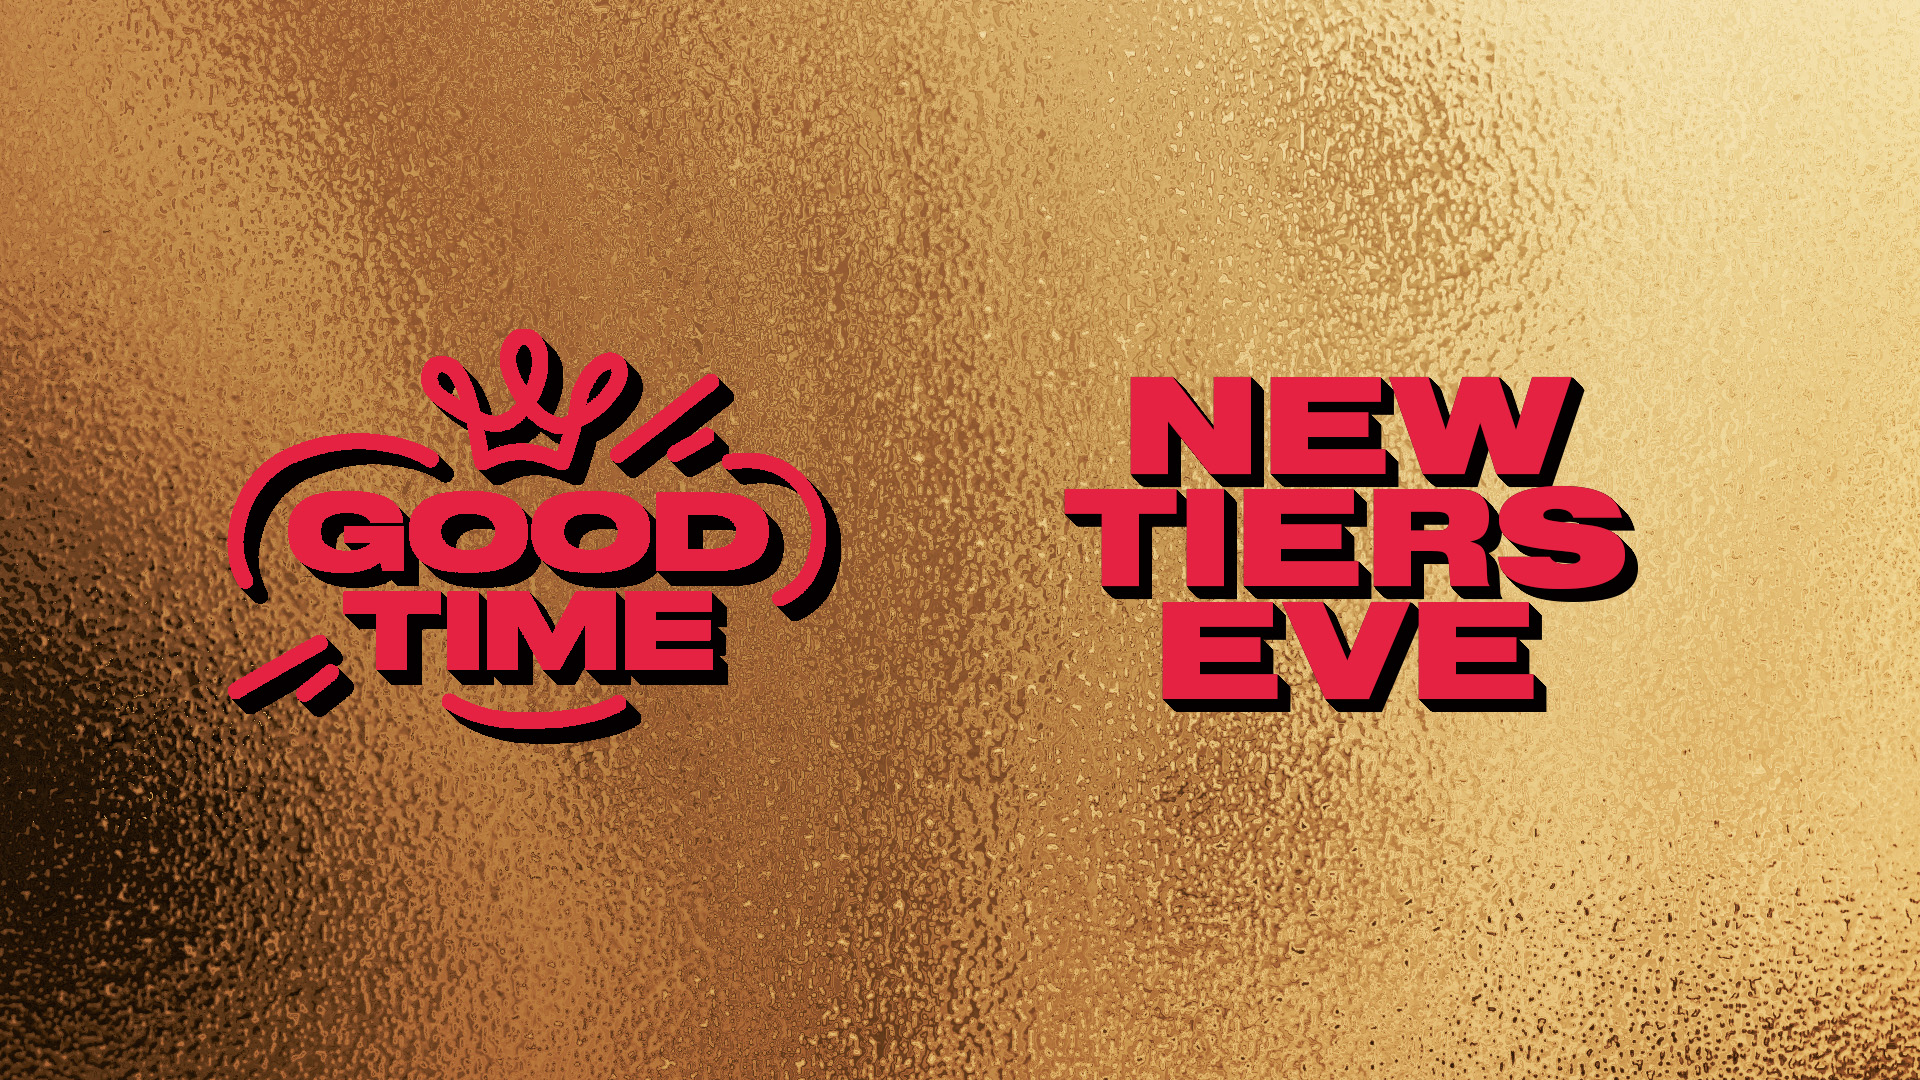 Thekla New Years 2020 Good Time Presents New Tiers Eve